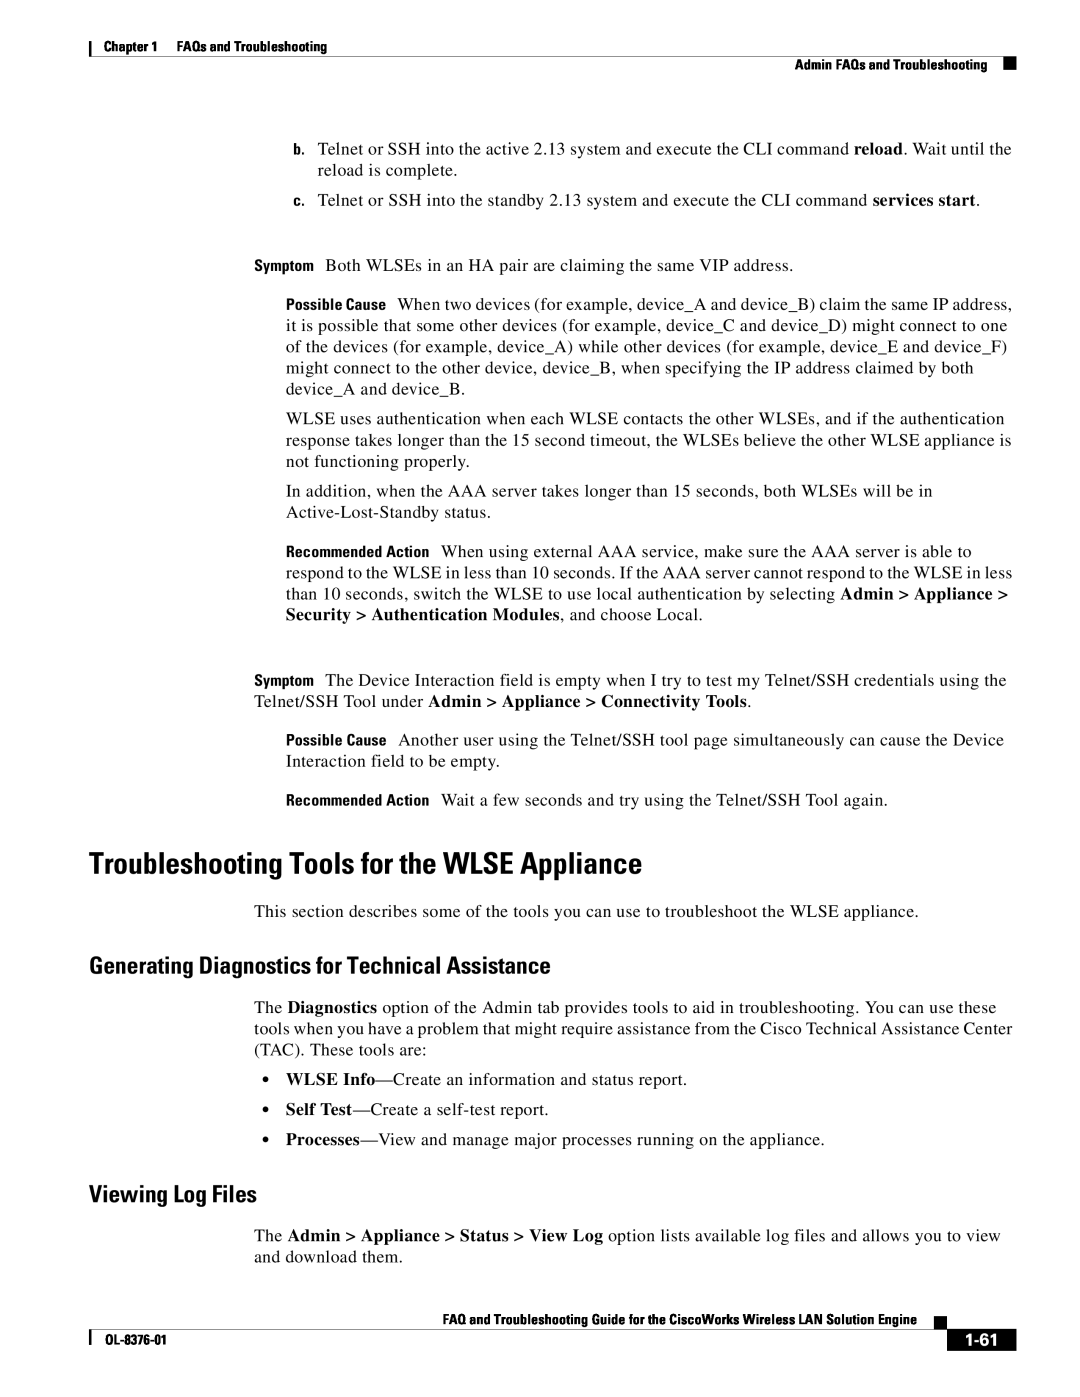 Cisco Systems OL-8376-01 Troubleshooting Tools for the WLSE Appliance, Generating Diagnostics for Technical Assistance 